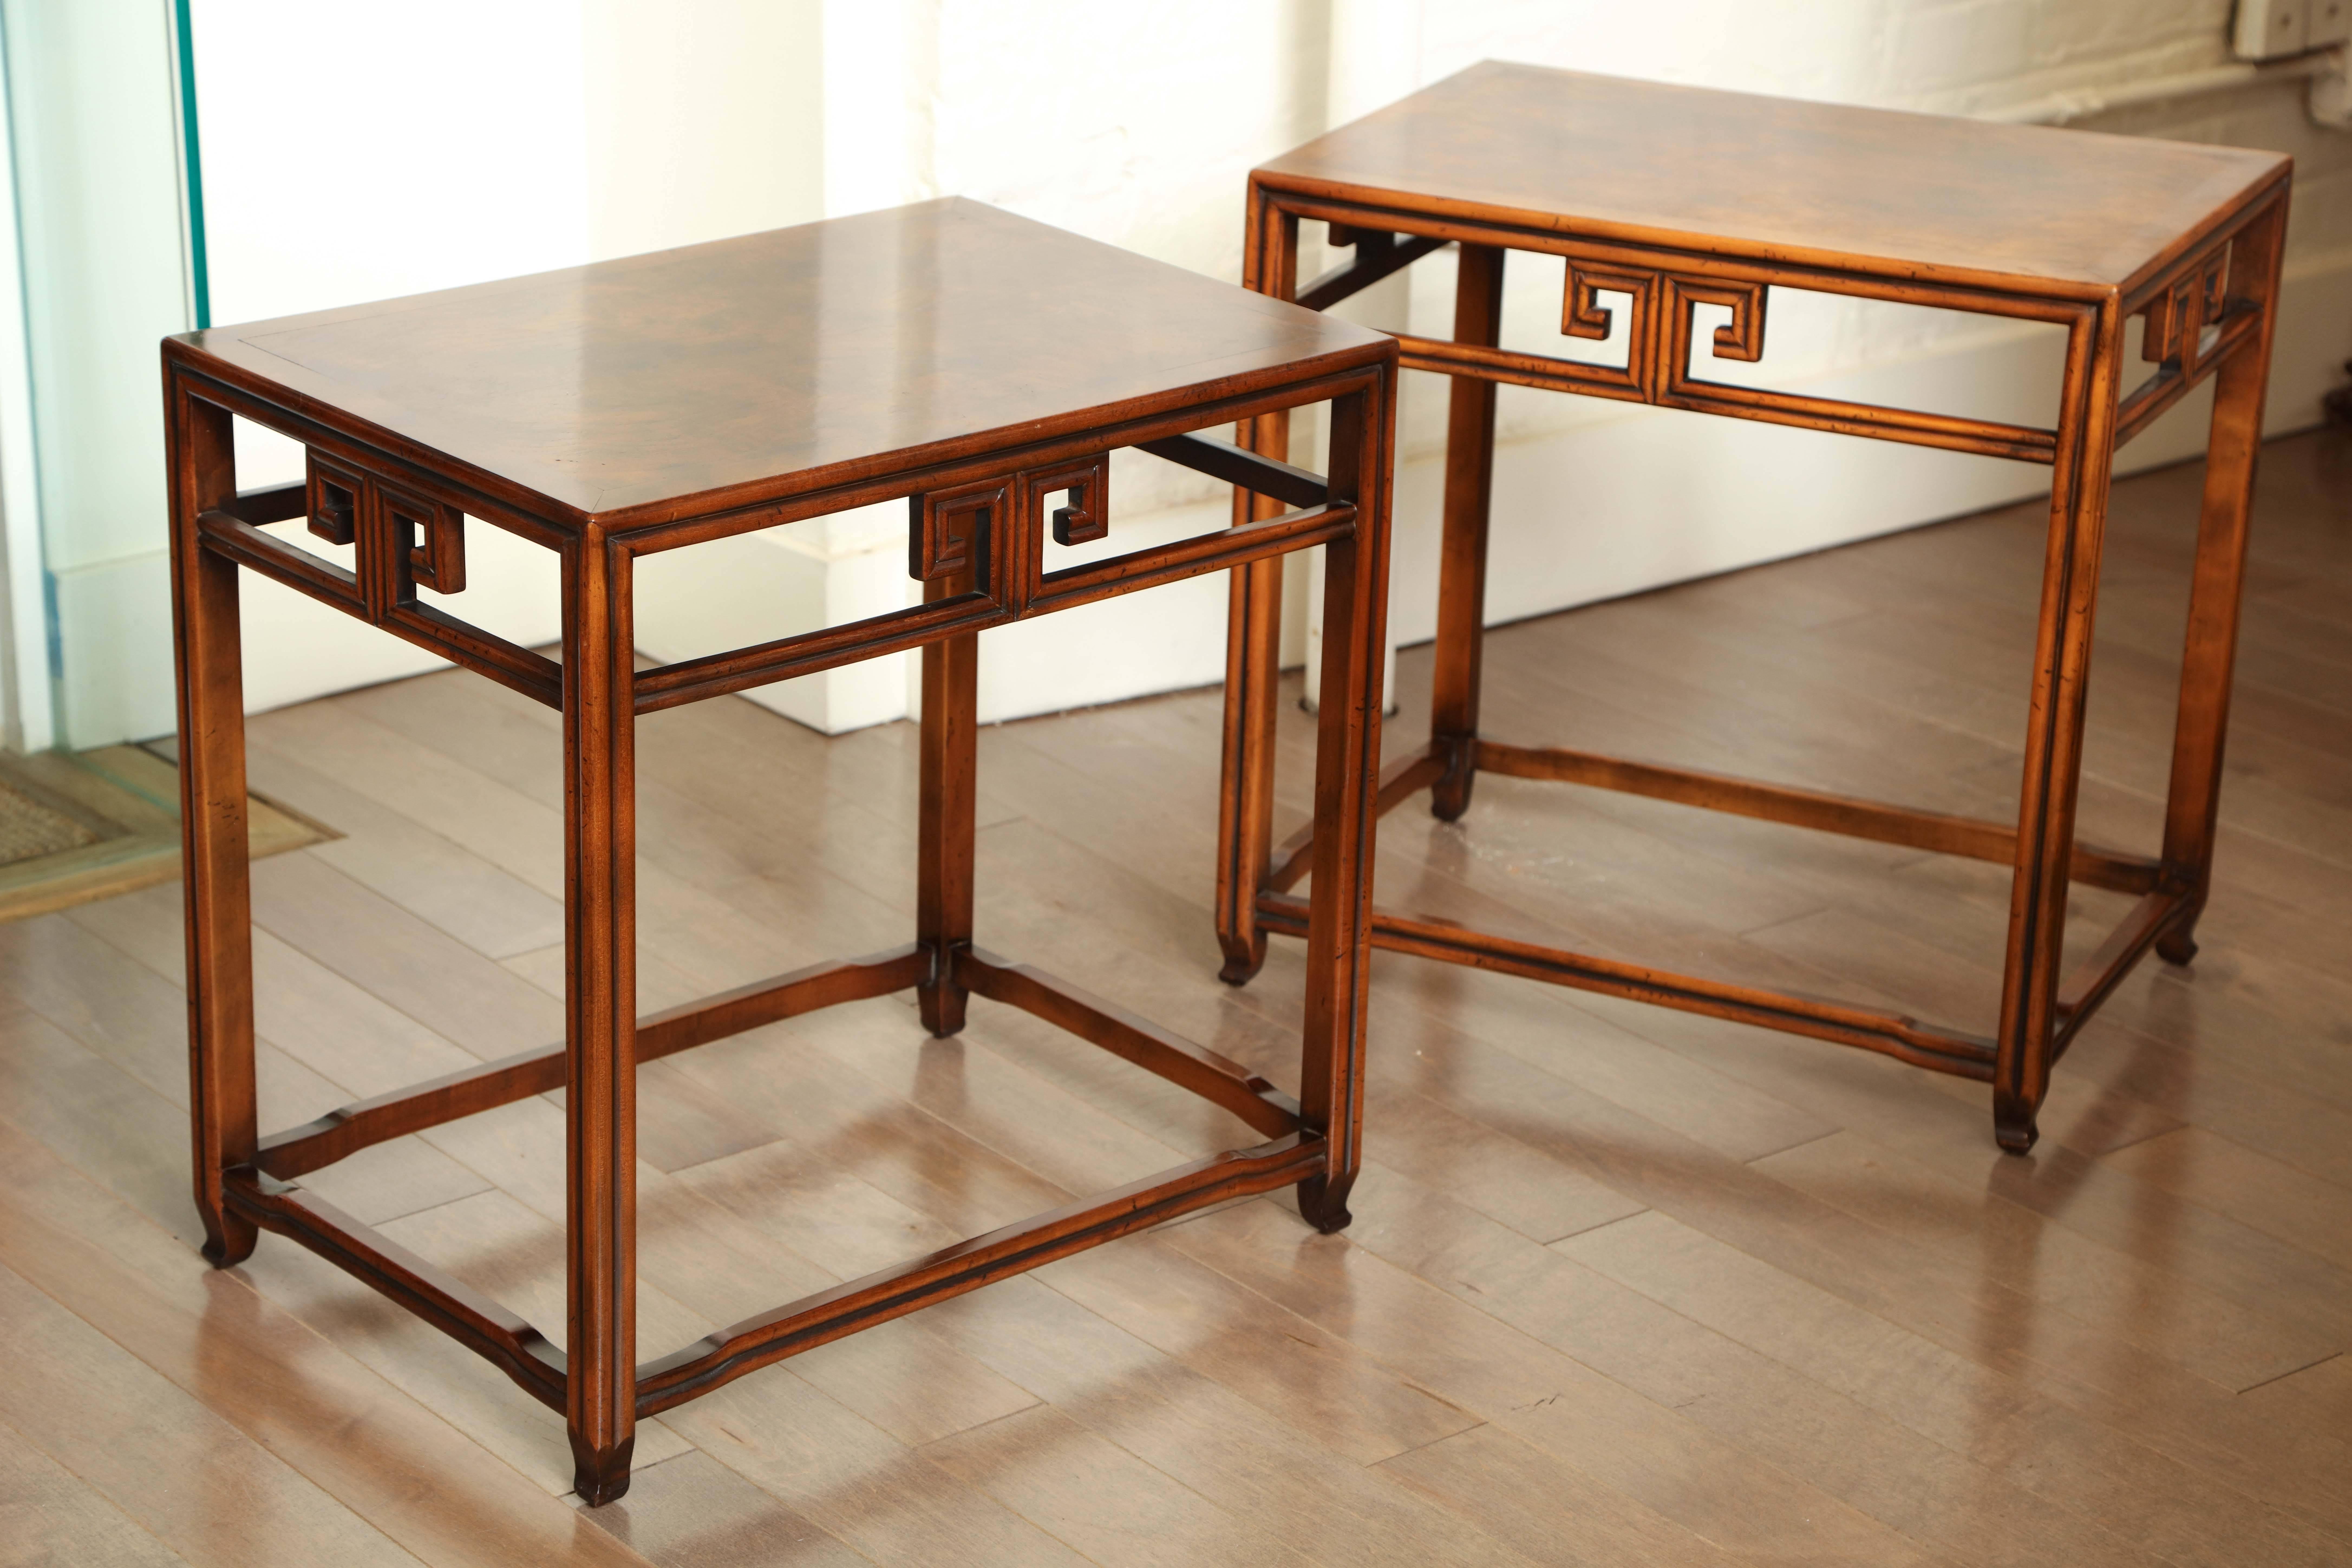 Pair of walnut occasional tables with Greek key design by Michael Taylor for Baker, circa 1970.